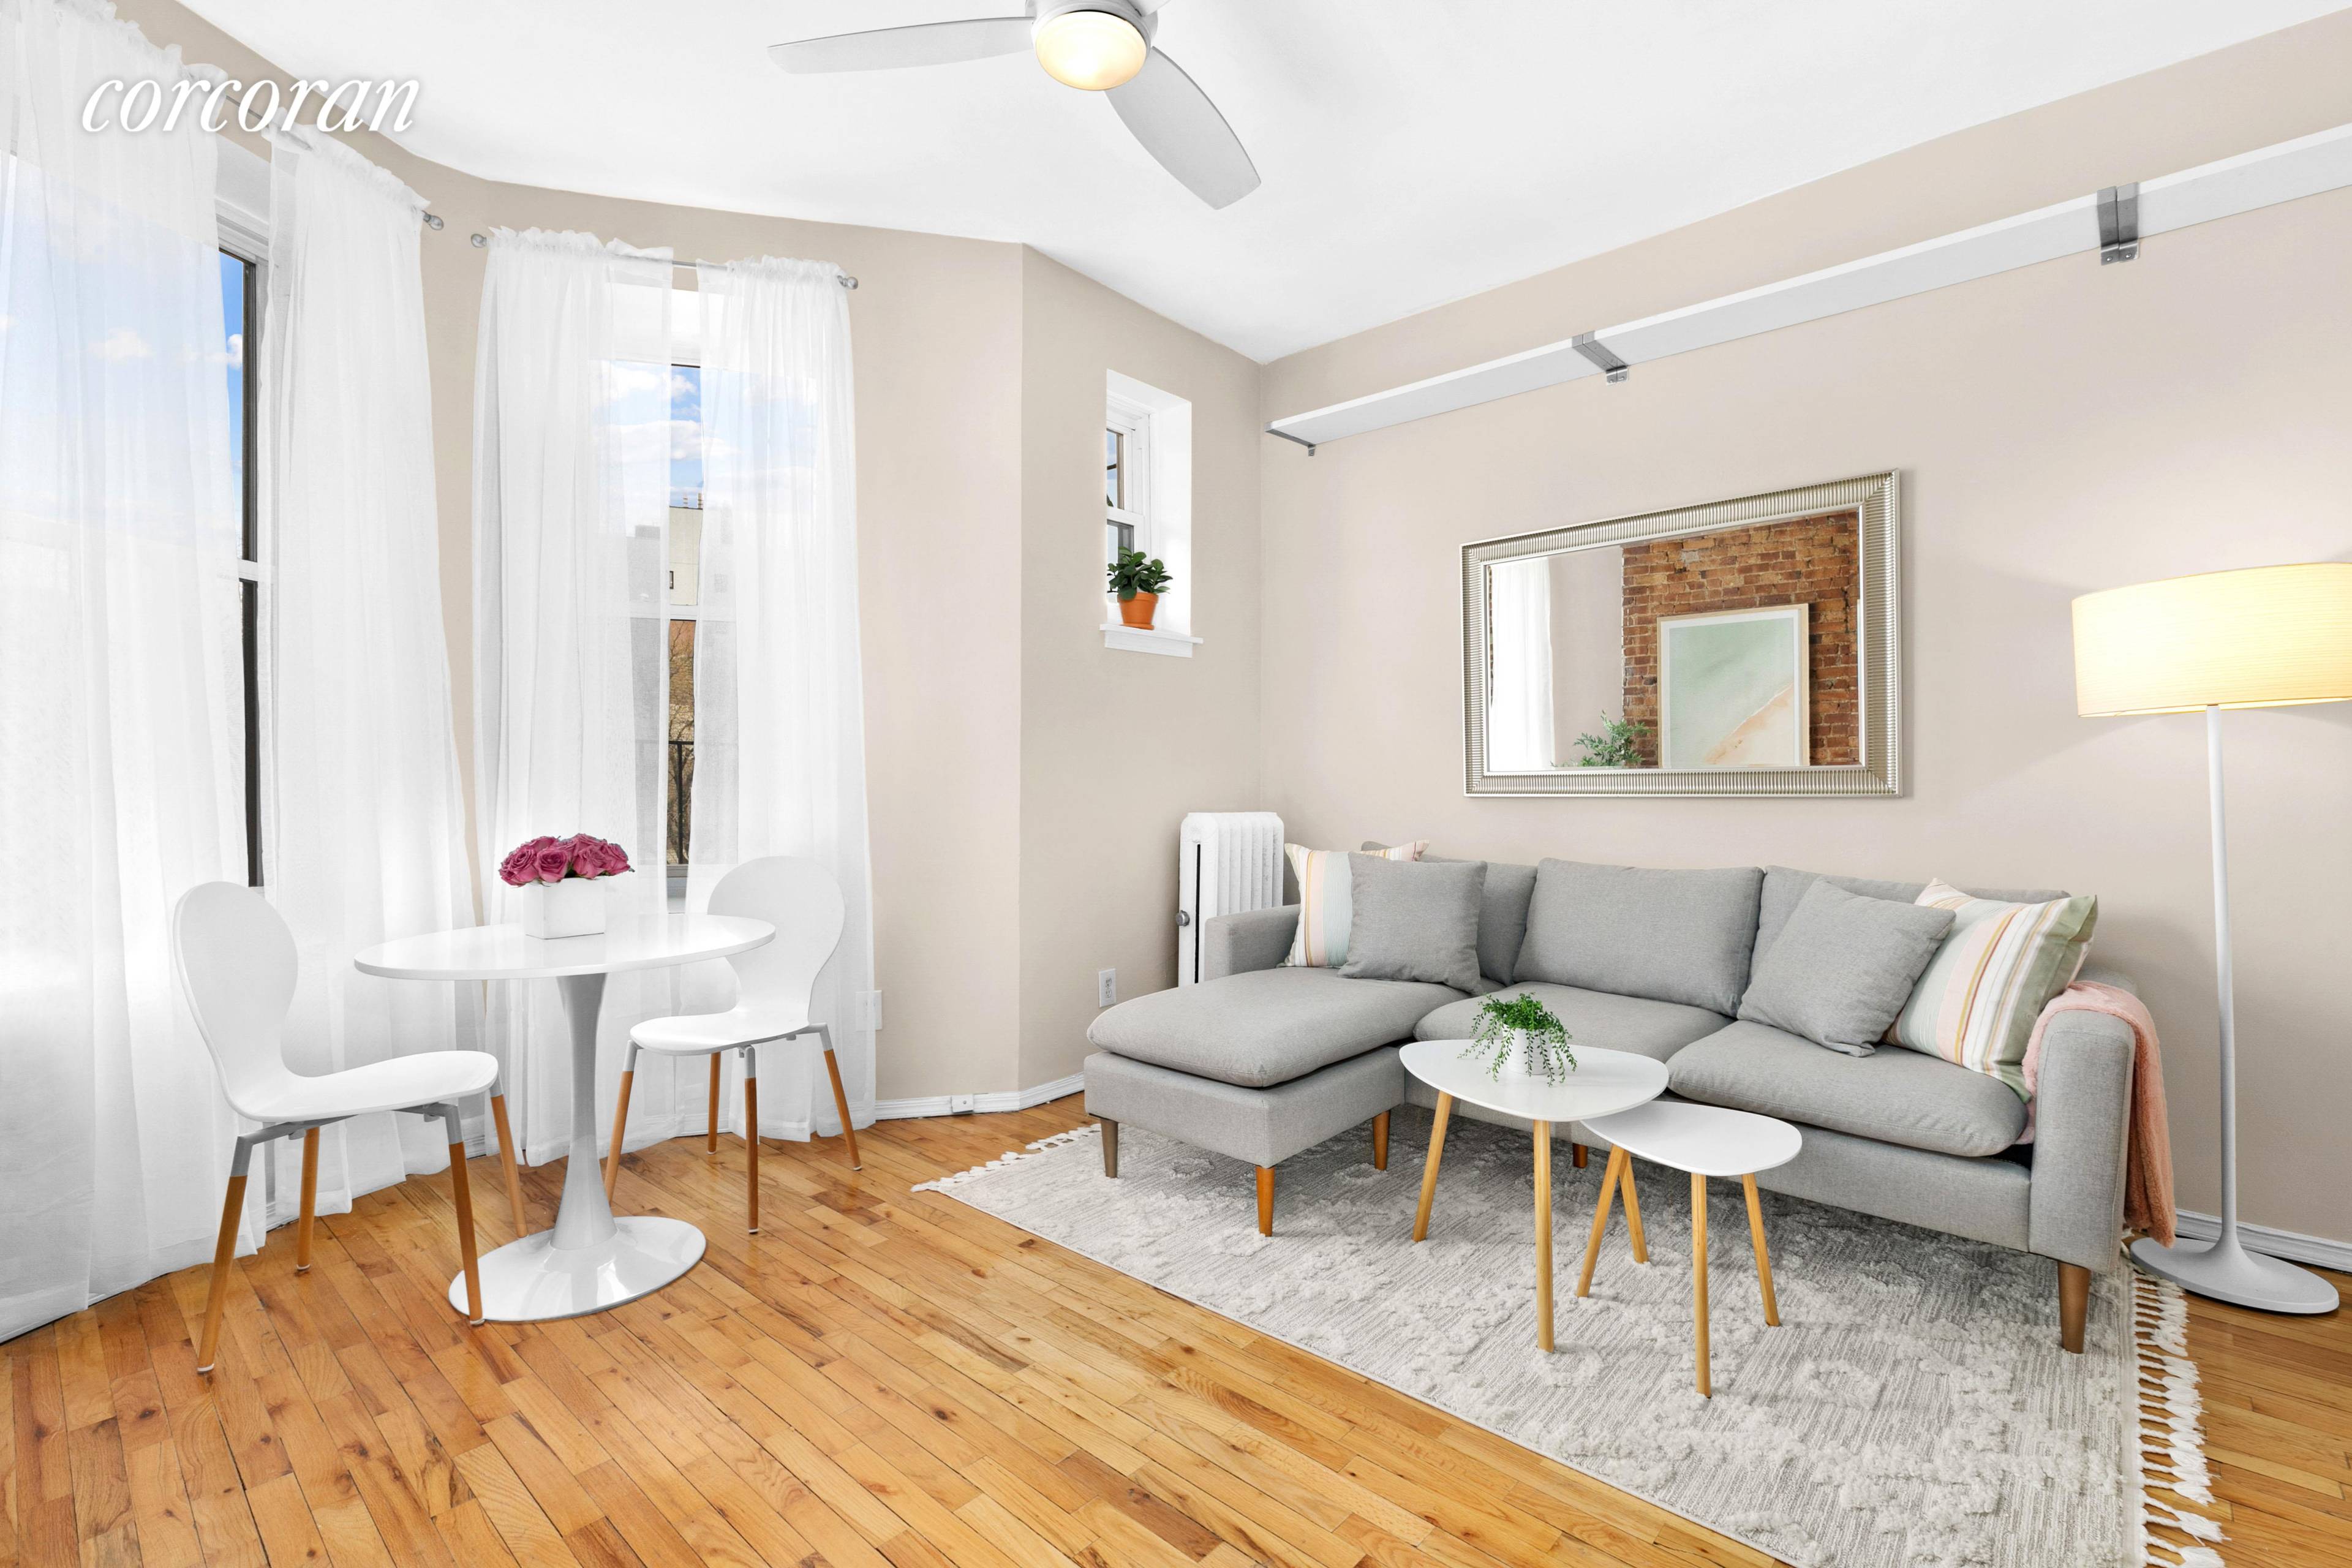 With only 10 down, this modern and chic prime Prospect Heights coop is calling you HOME !